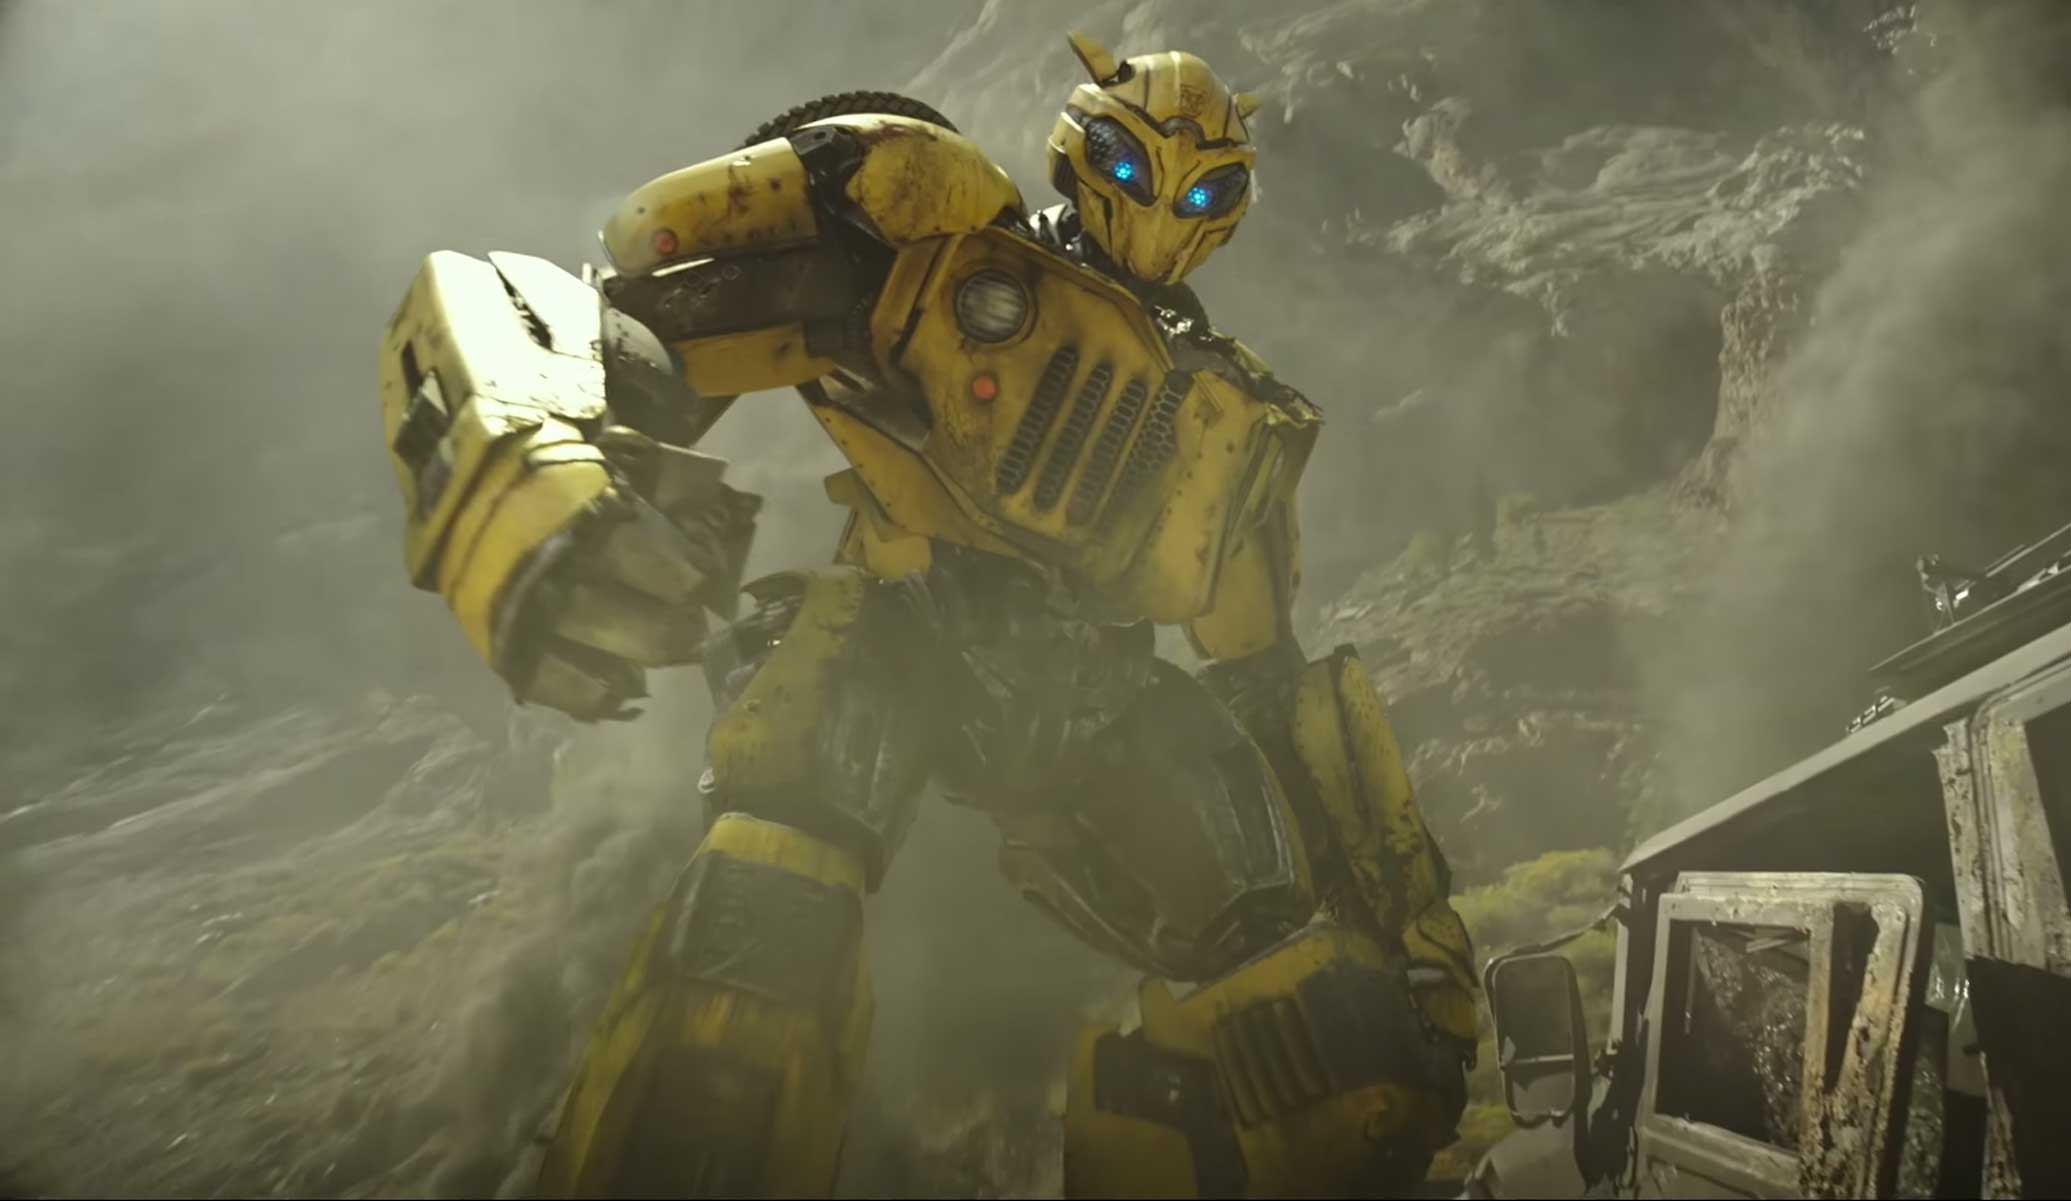 We're Getting Retro Vibes In The First Trailer For Transformers Spinoff 'Bumblebee'